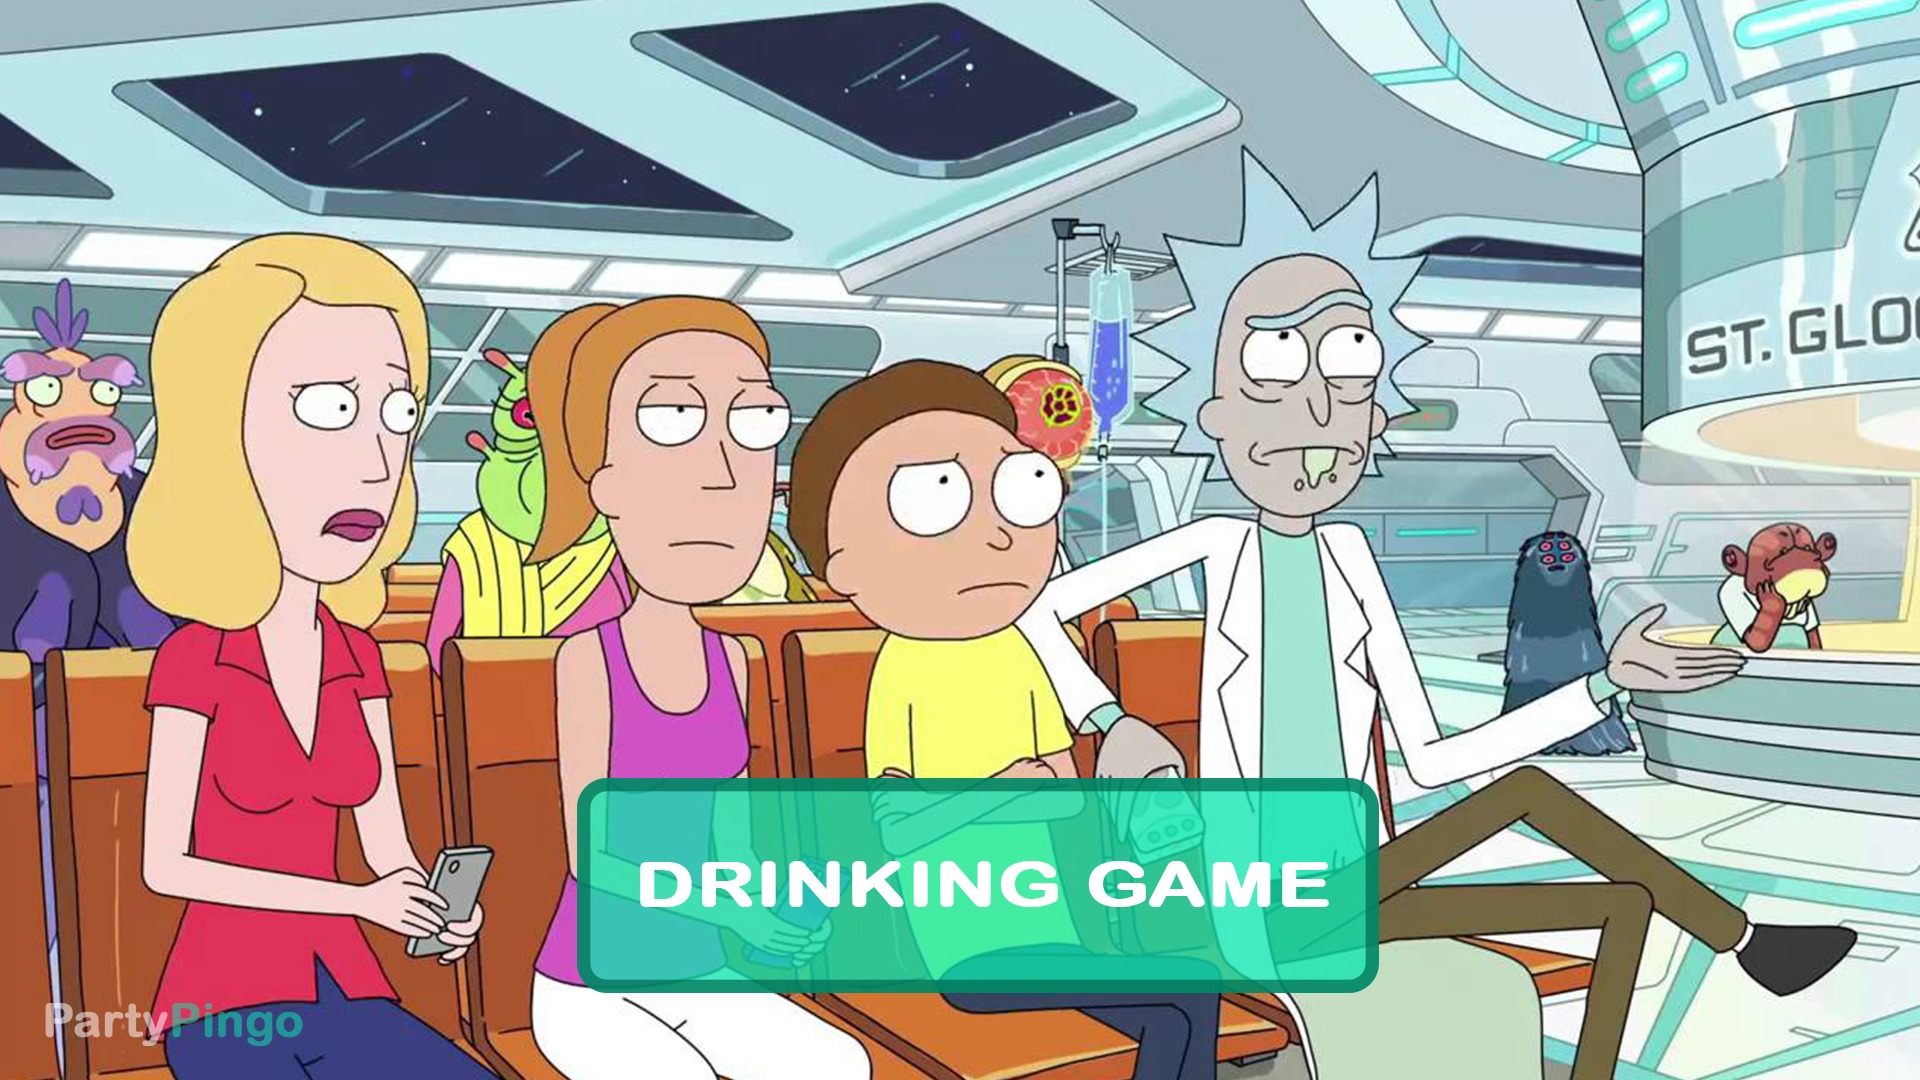 Rick and Morty - Interdimensional Cable 2 Drinking Game